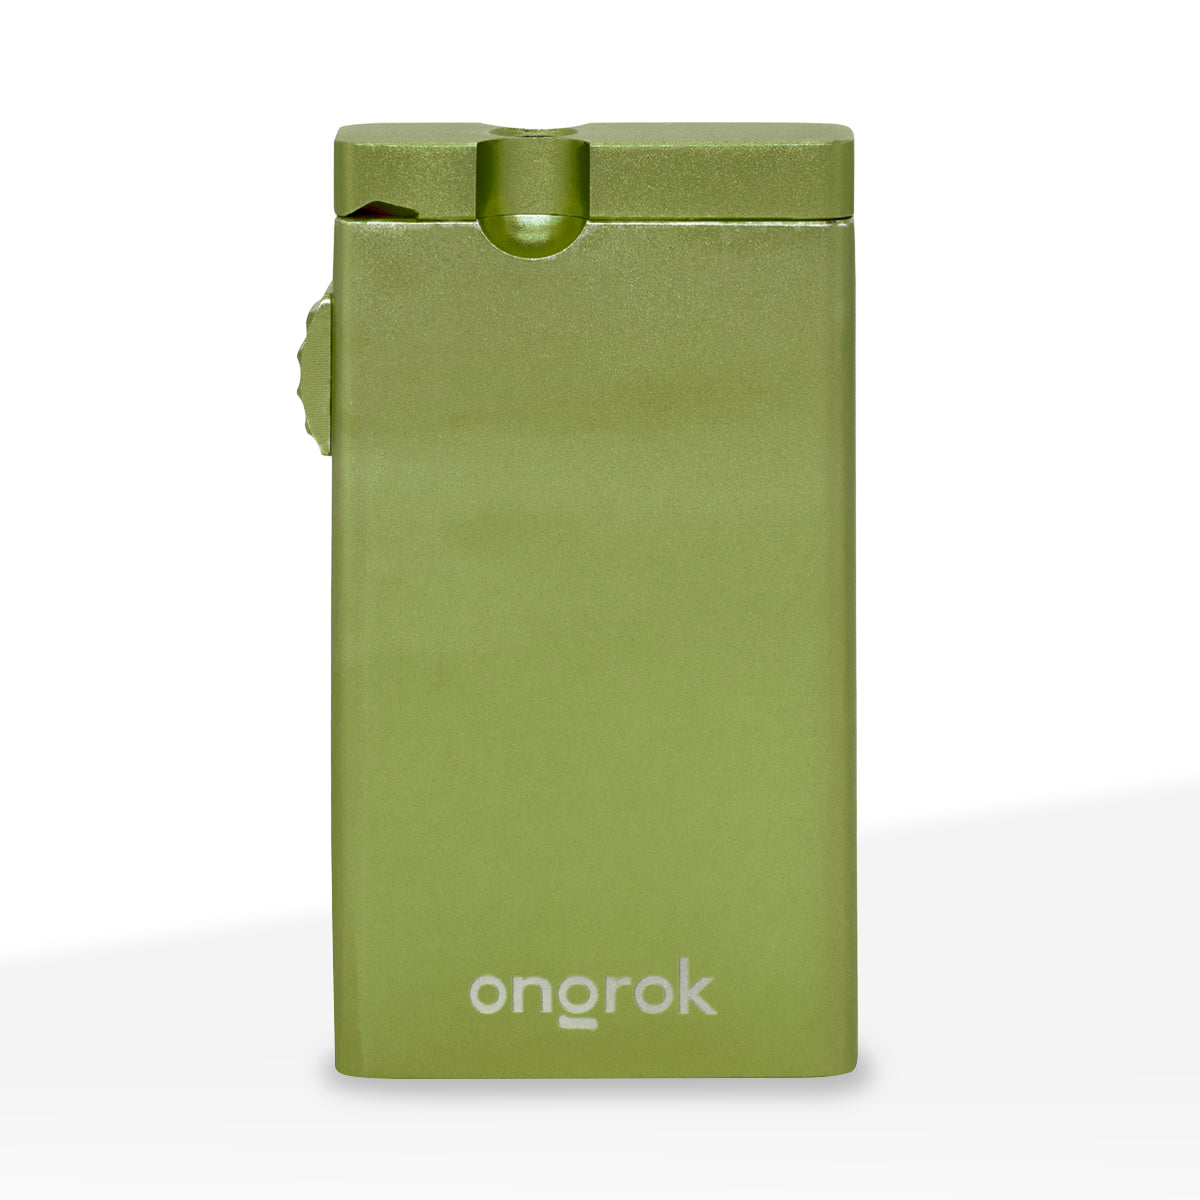 ONGROK Dugout with Aluminum One-Hitter Pipe